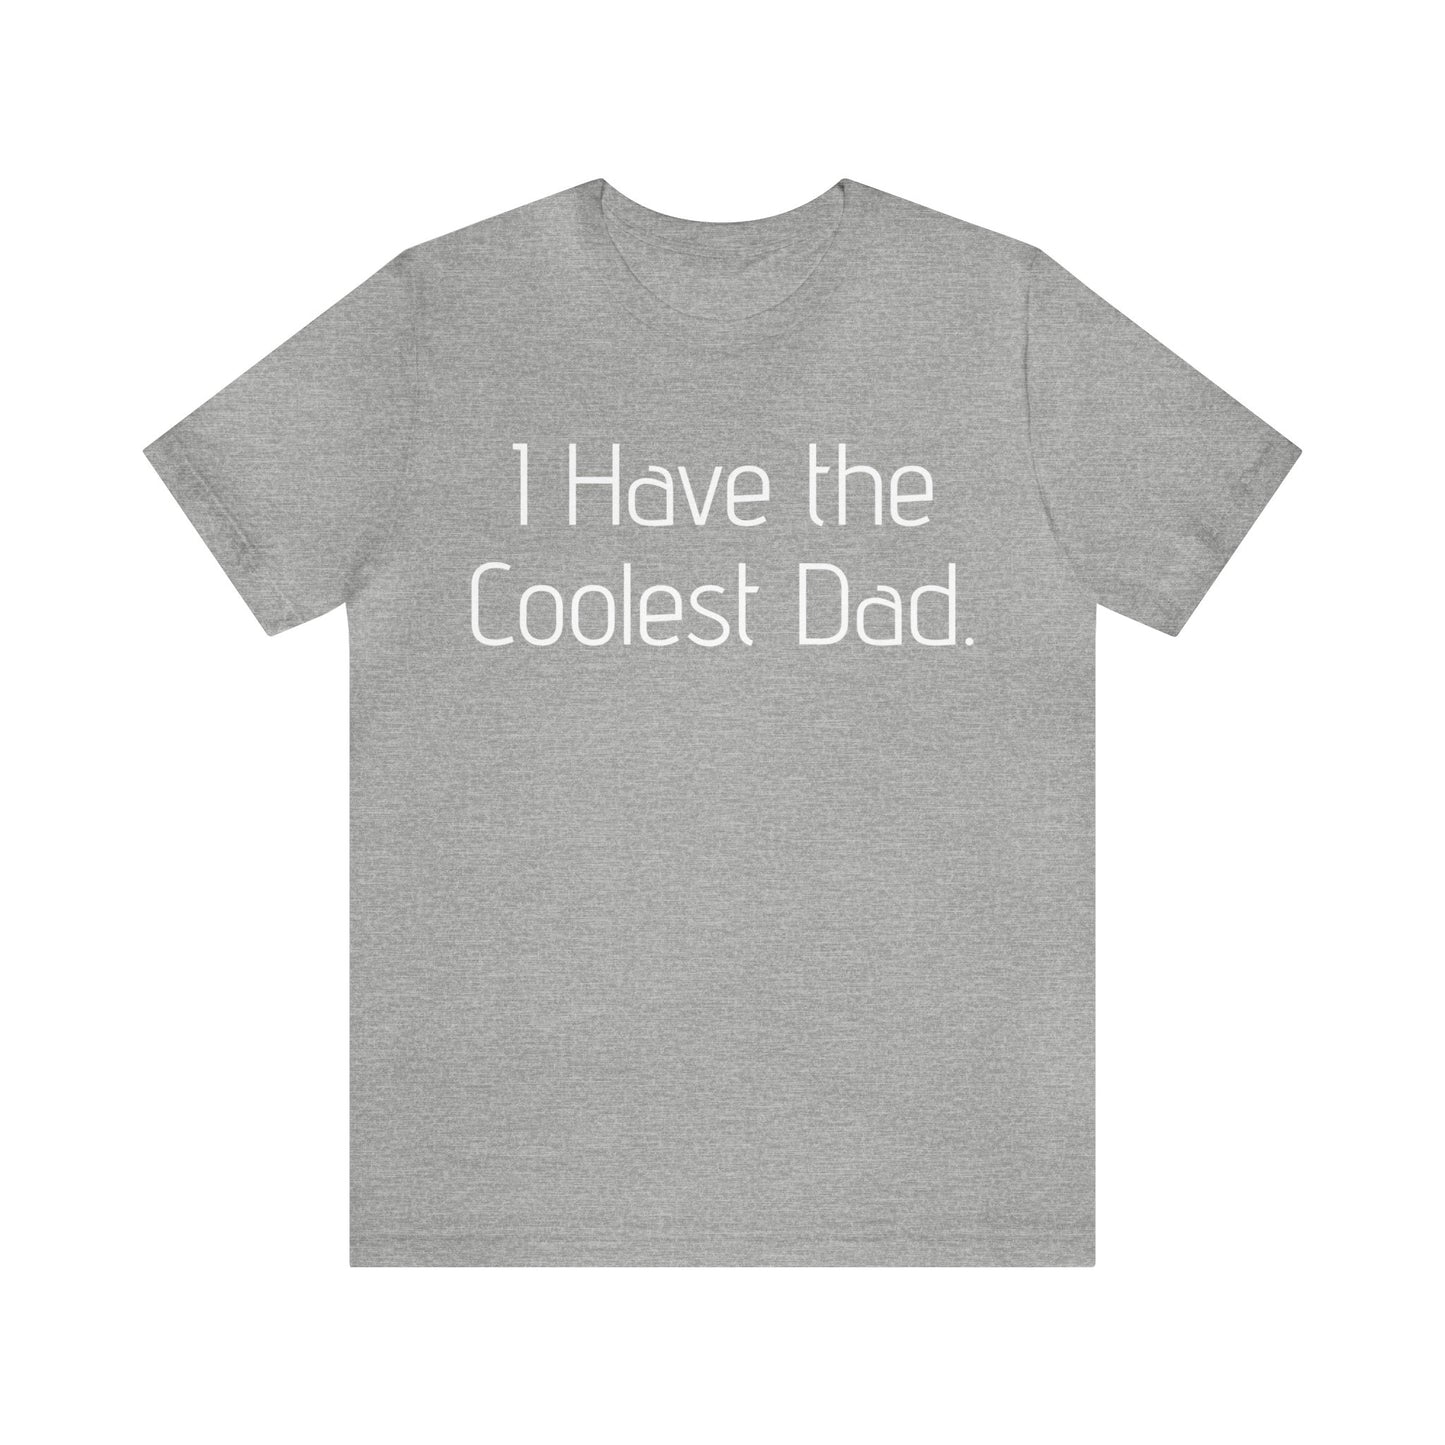 For Son | Daughter Gift Idea From Dad | T-Shirt For Son or Daugher T-Shirt Petrova Designs